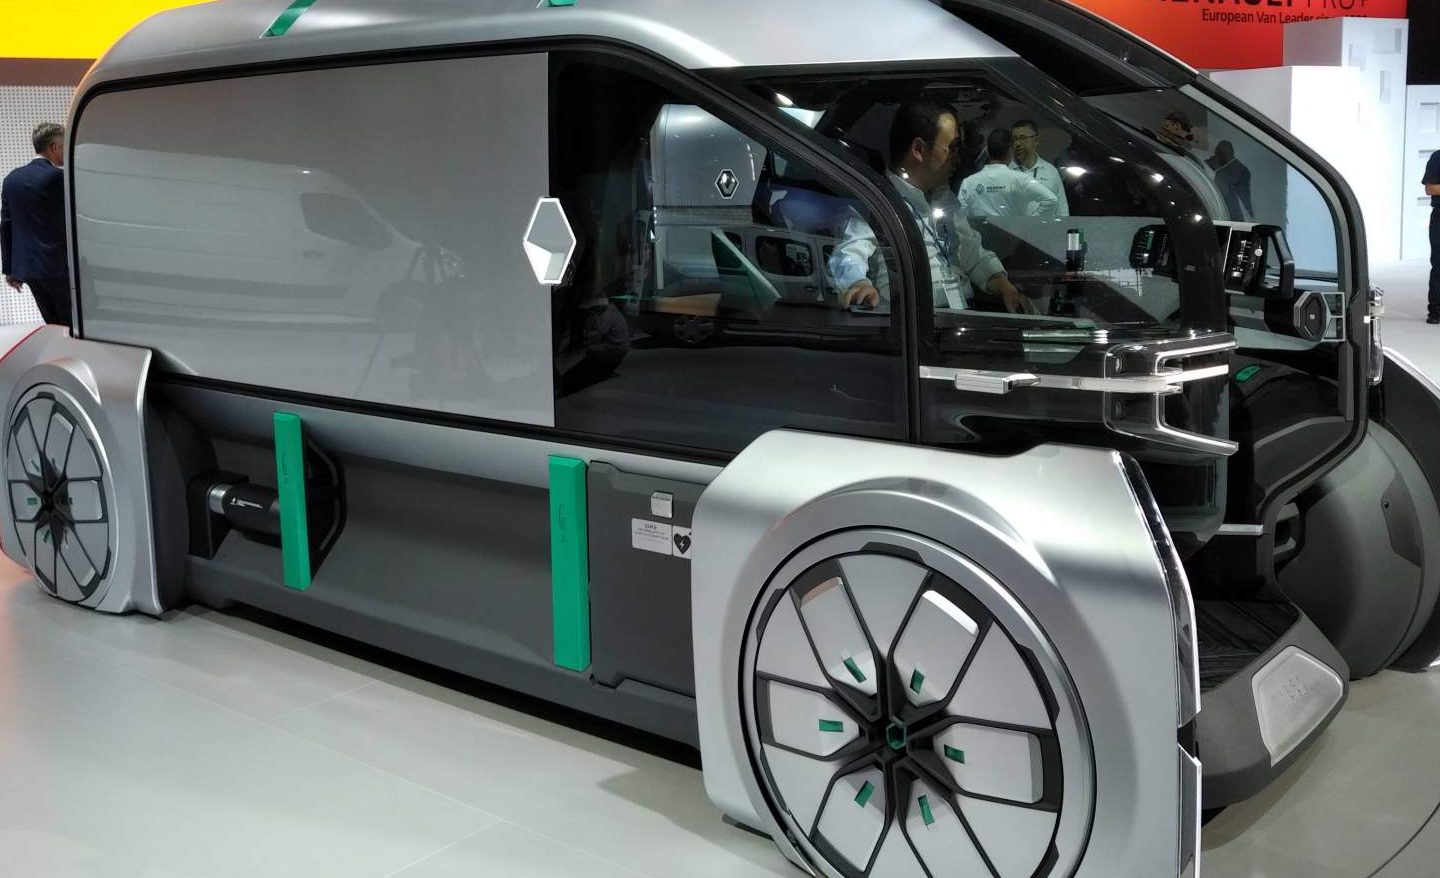 What You Should Know About Renault’s Driverless Delivery Vehicle